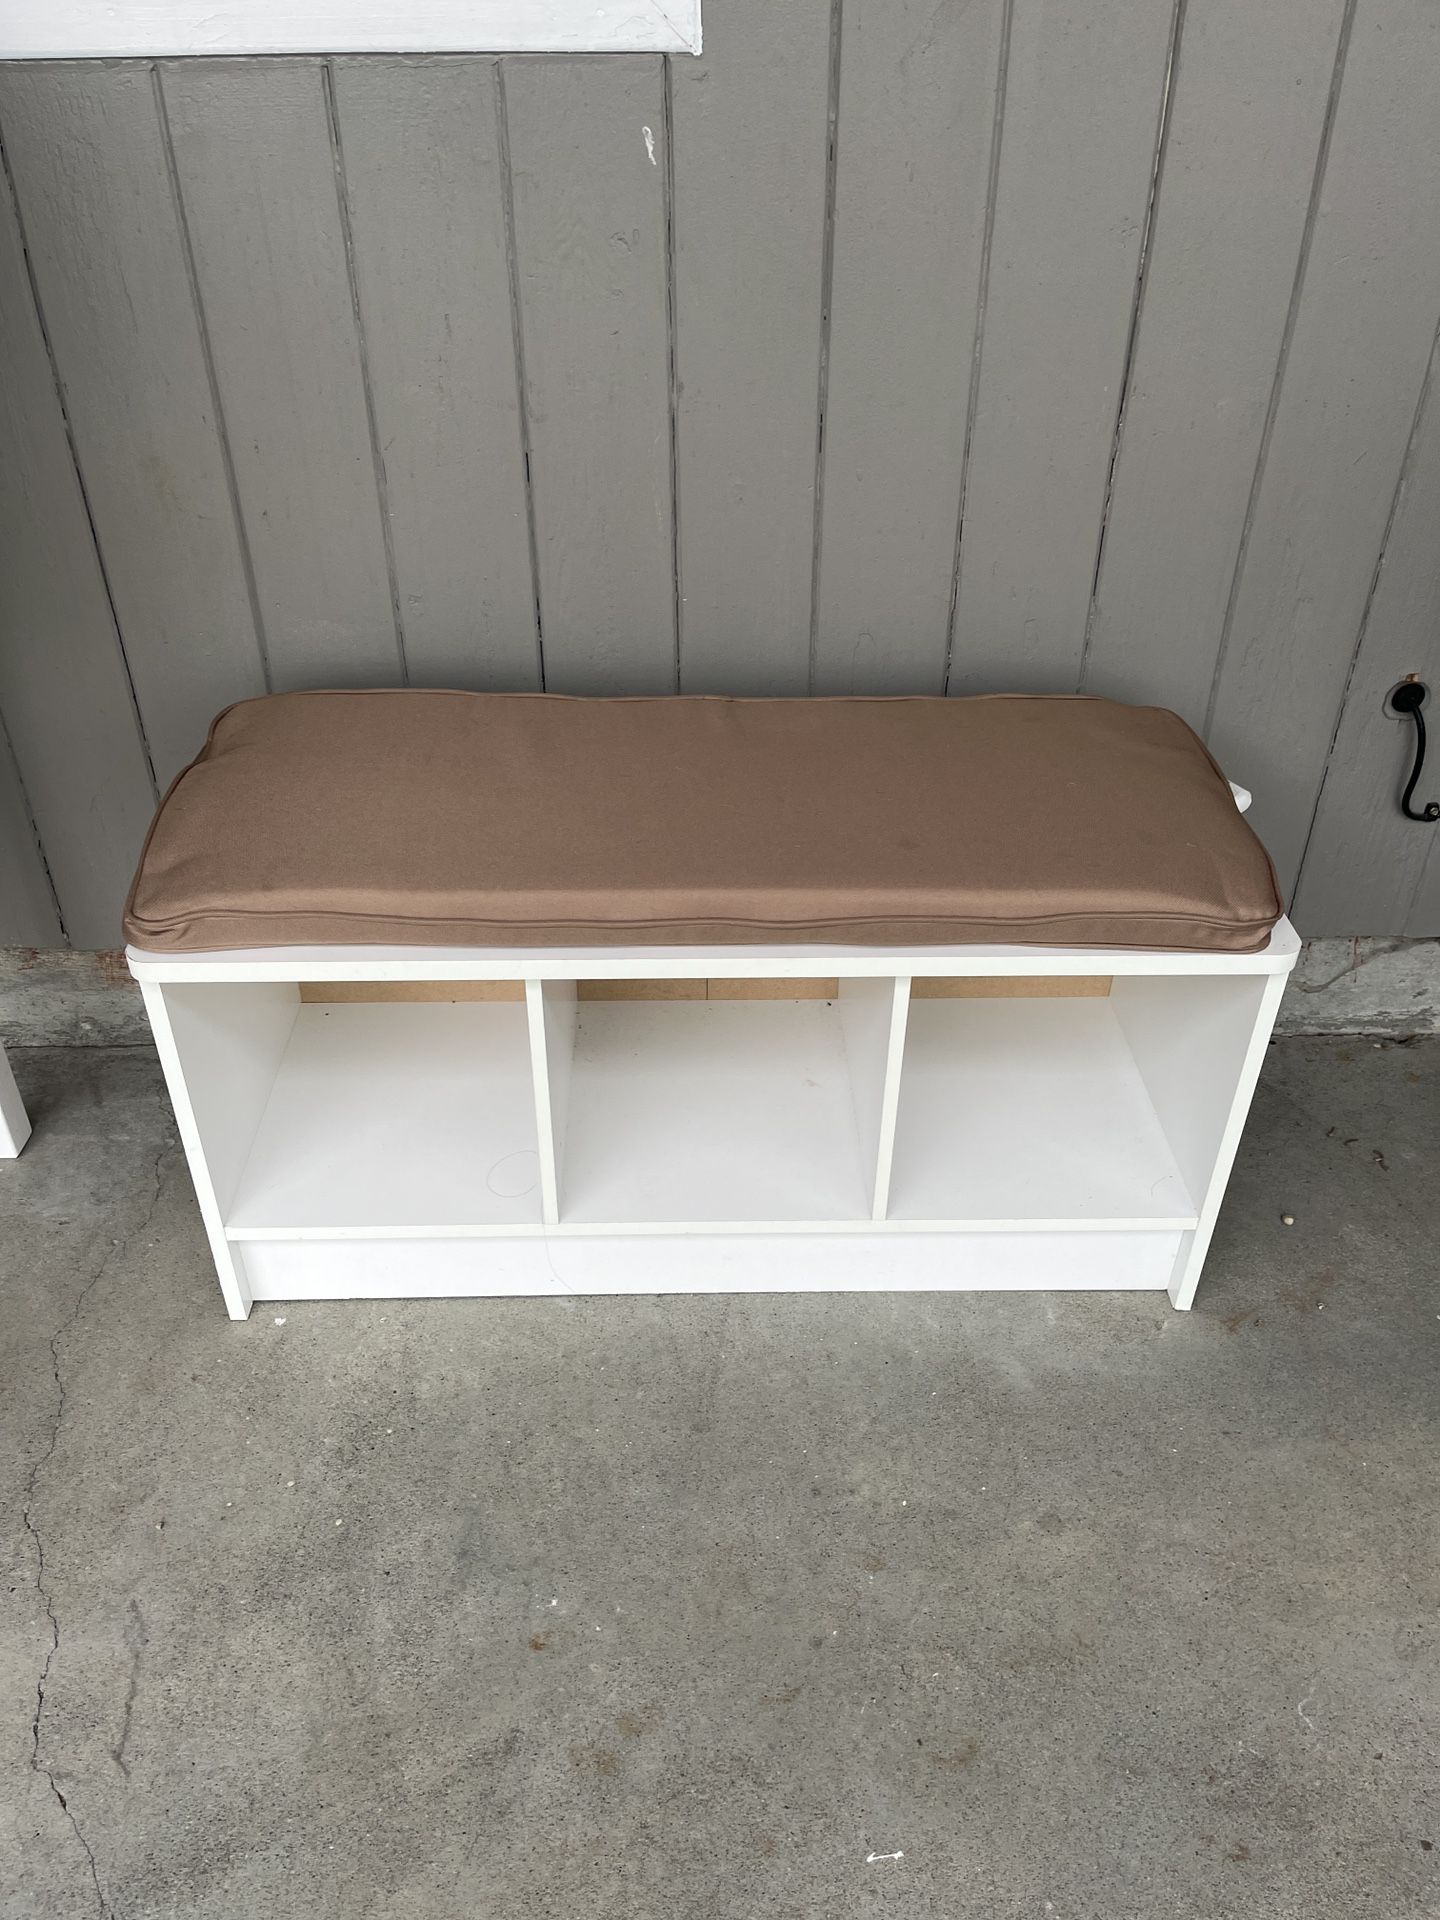 Mudroom Bench With Storage